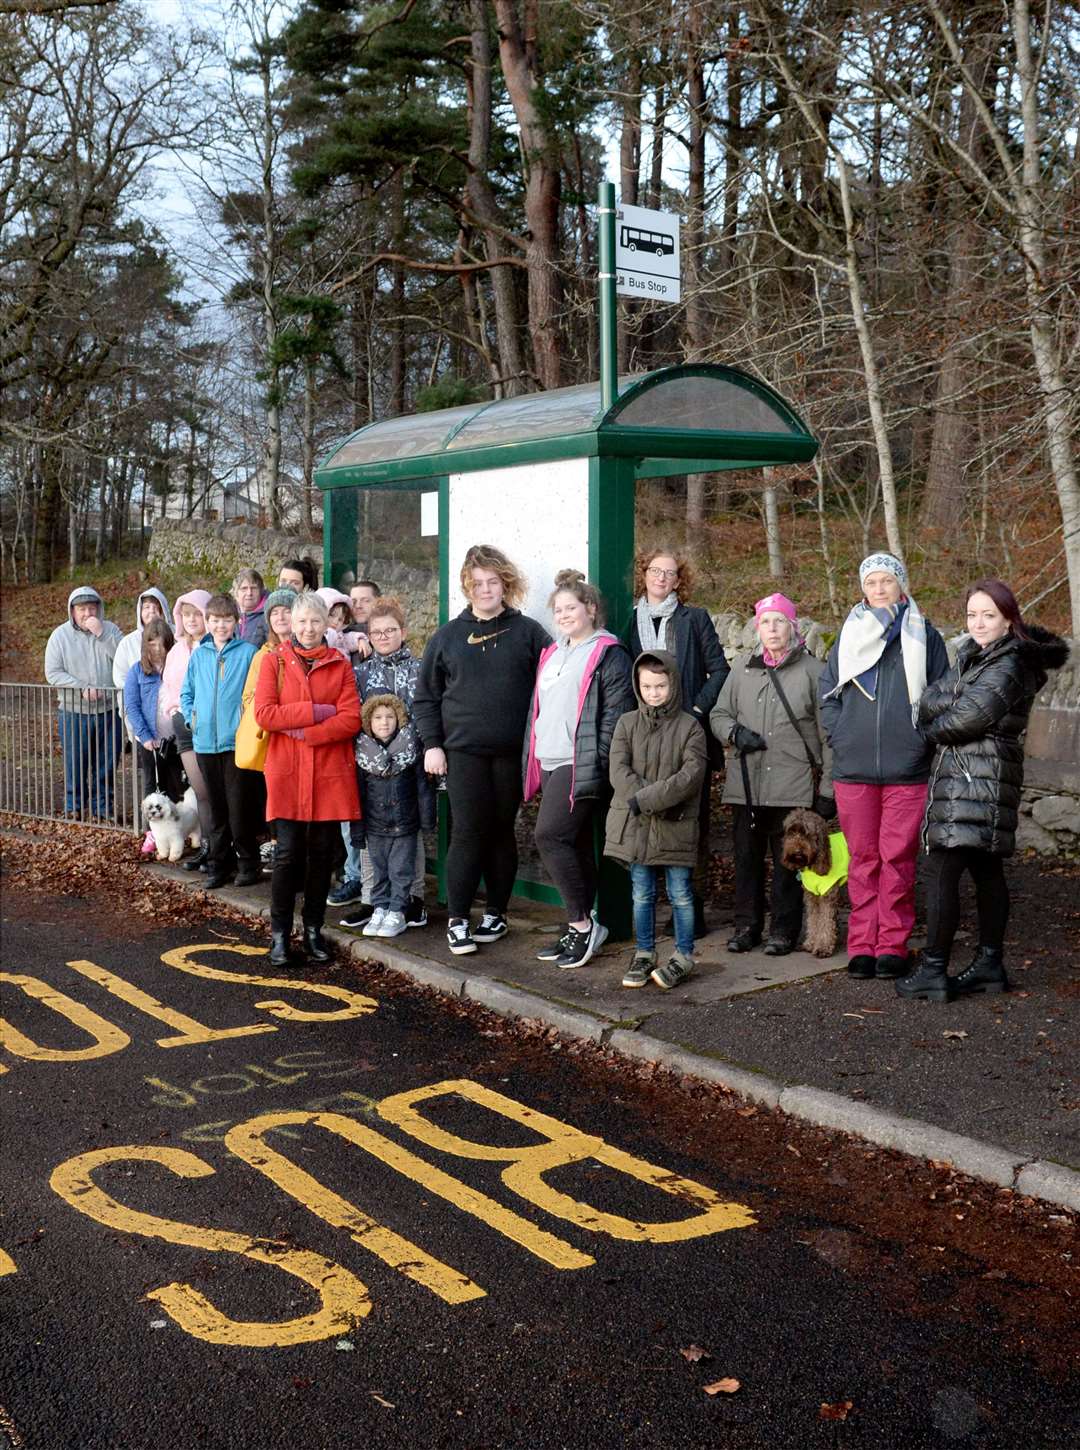 Contin bus users are very wary of the proposed bus timetable changes.